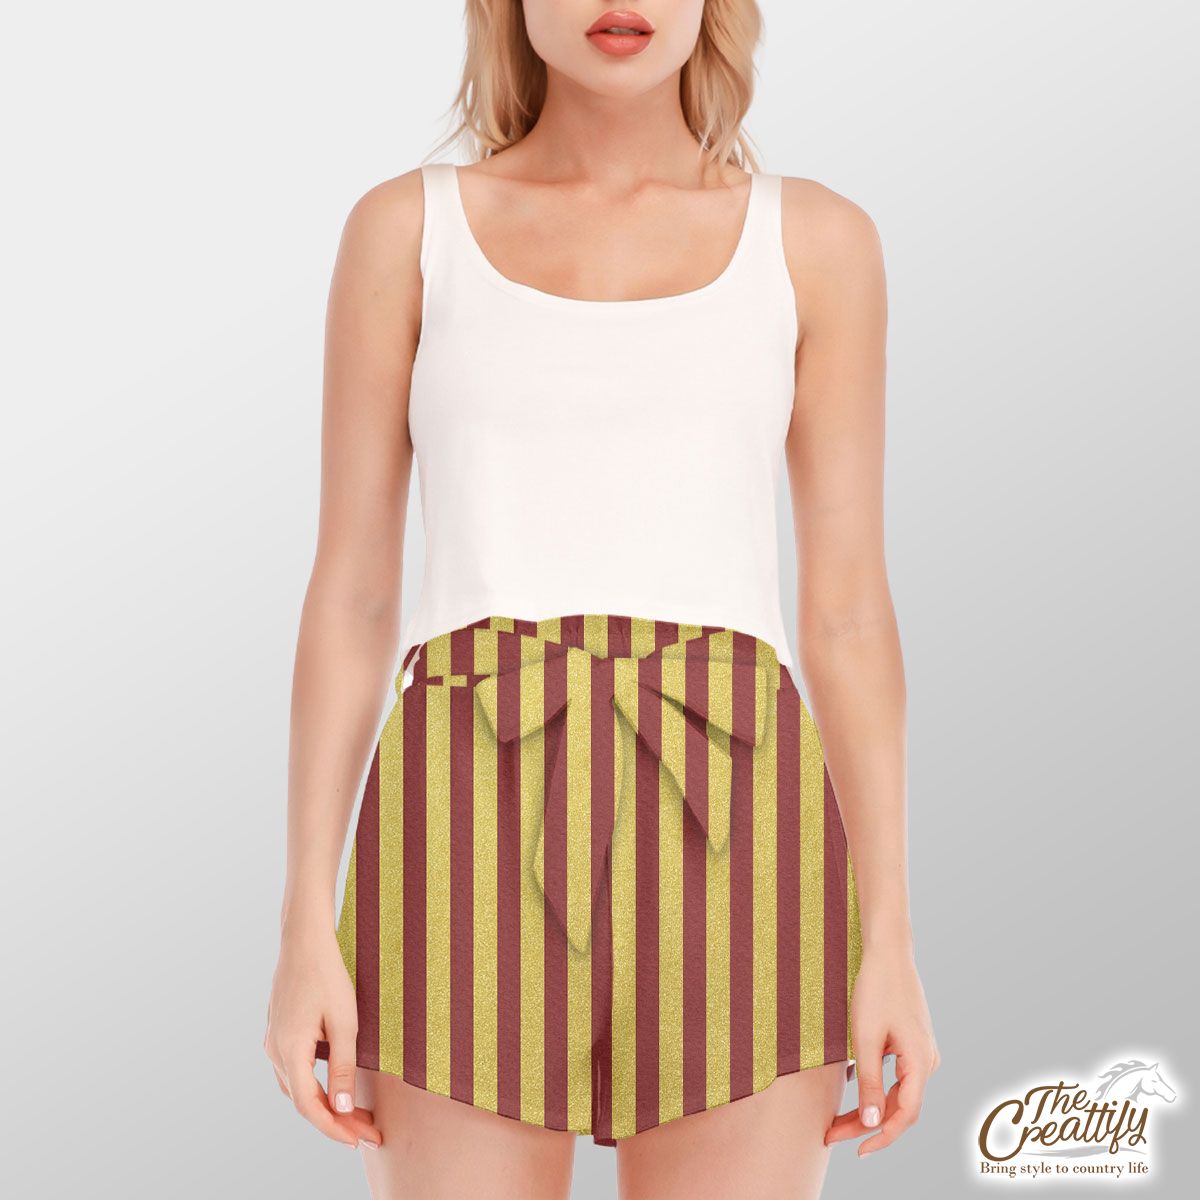 Christmas Gift Ideas, Christmas Gold, Gold Sparkle, Striped Gold On Red Waist Shorts